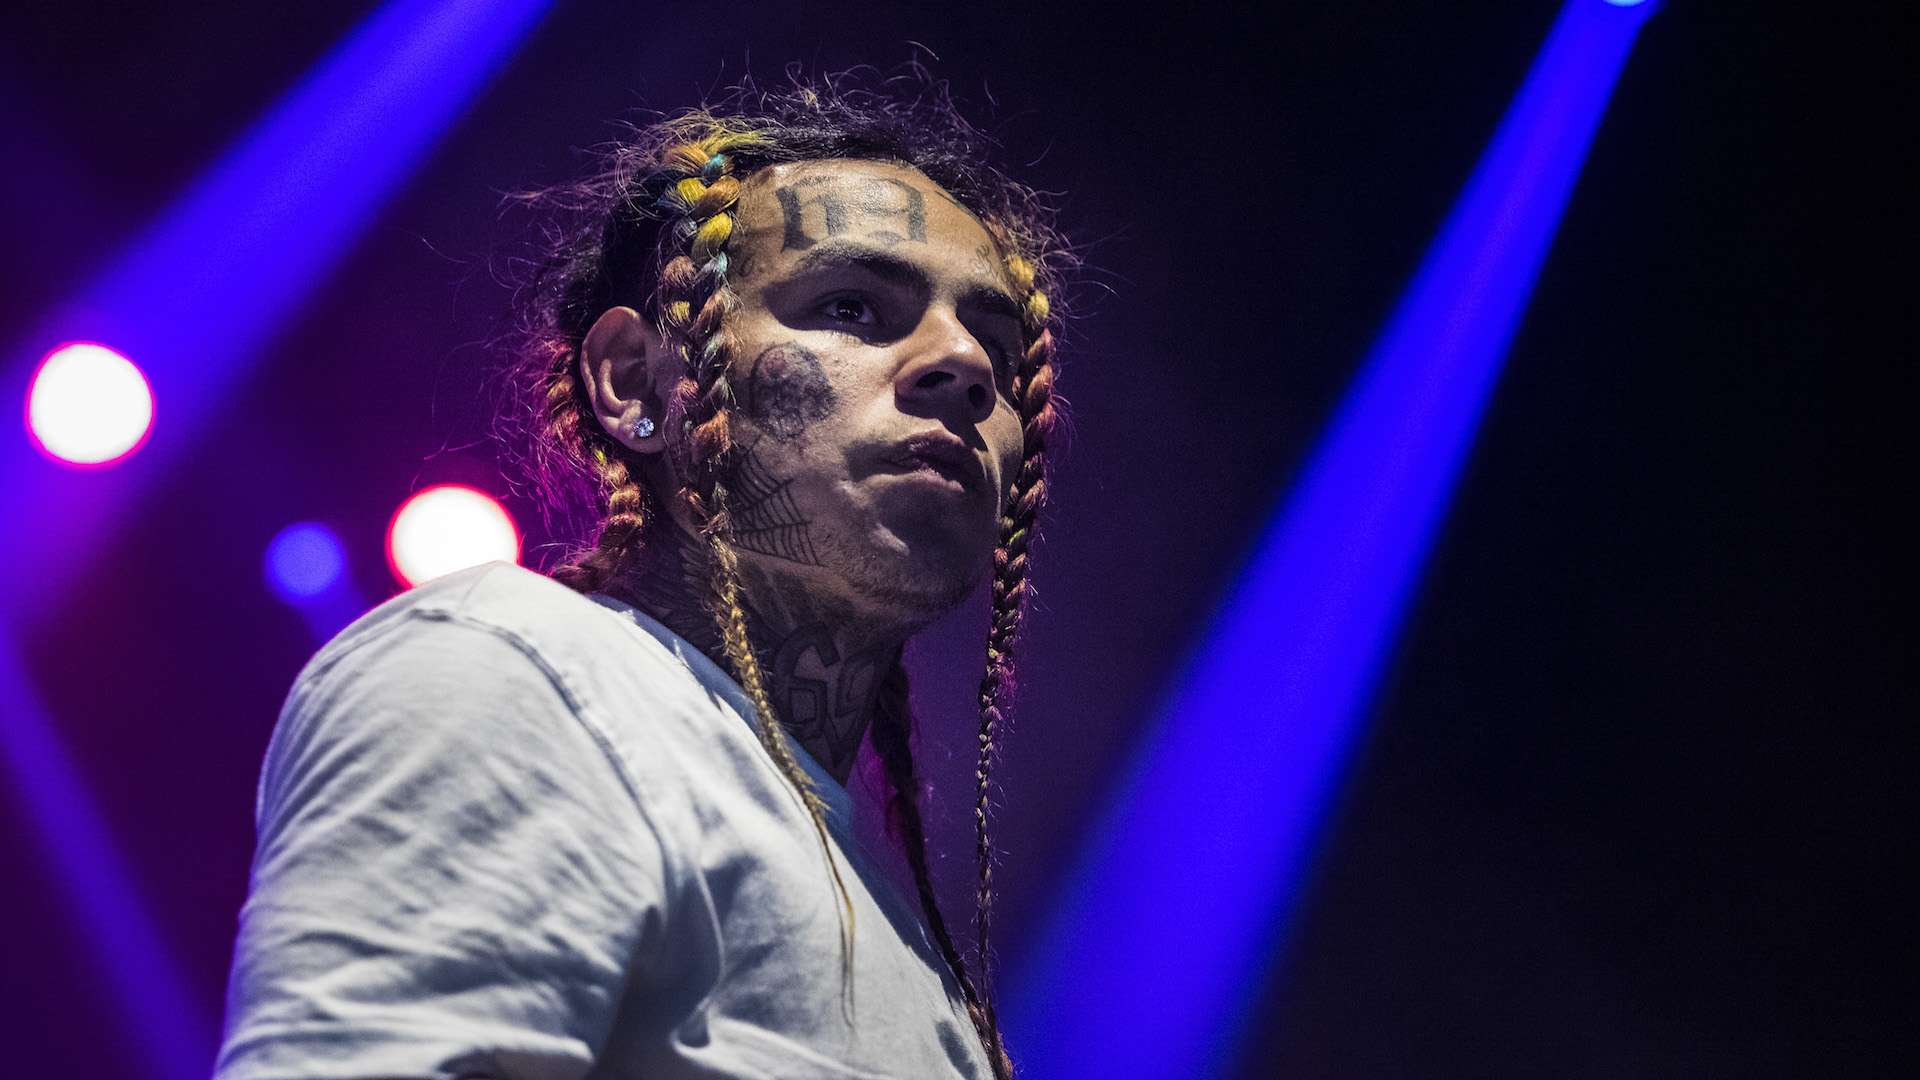 6ix9ine Docuseries Director Says Rapper Is 'Truly a Horrible Human’